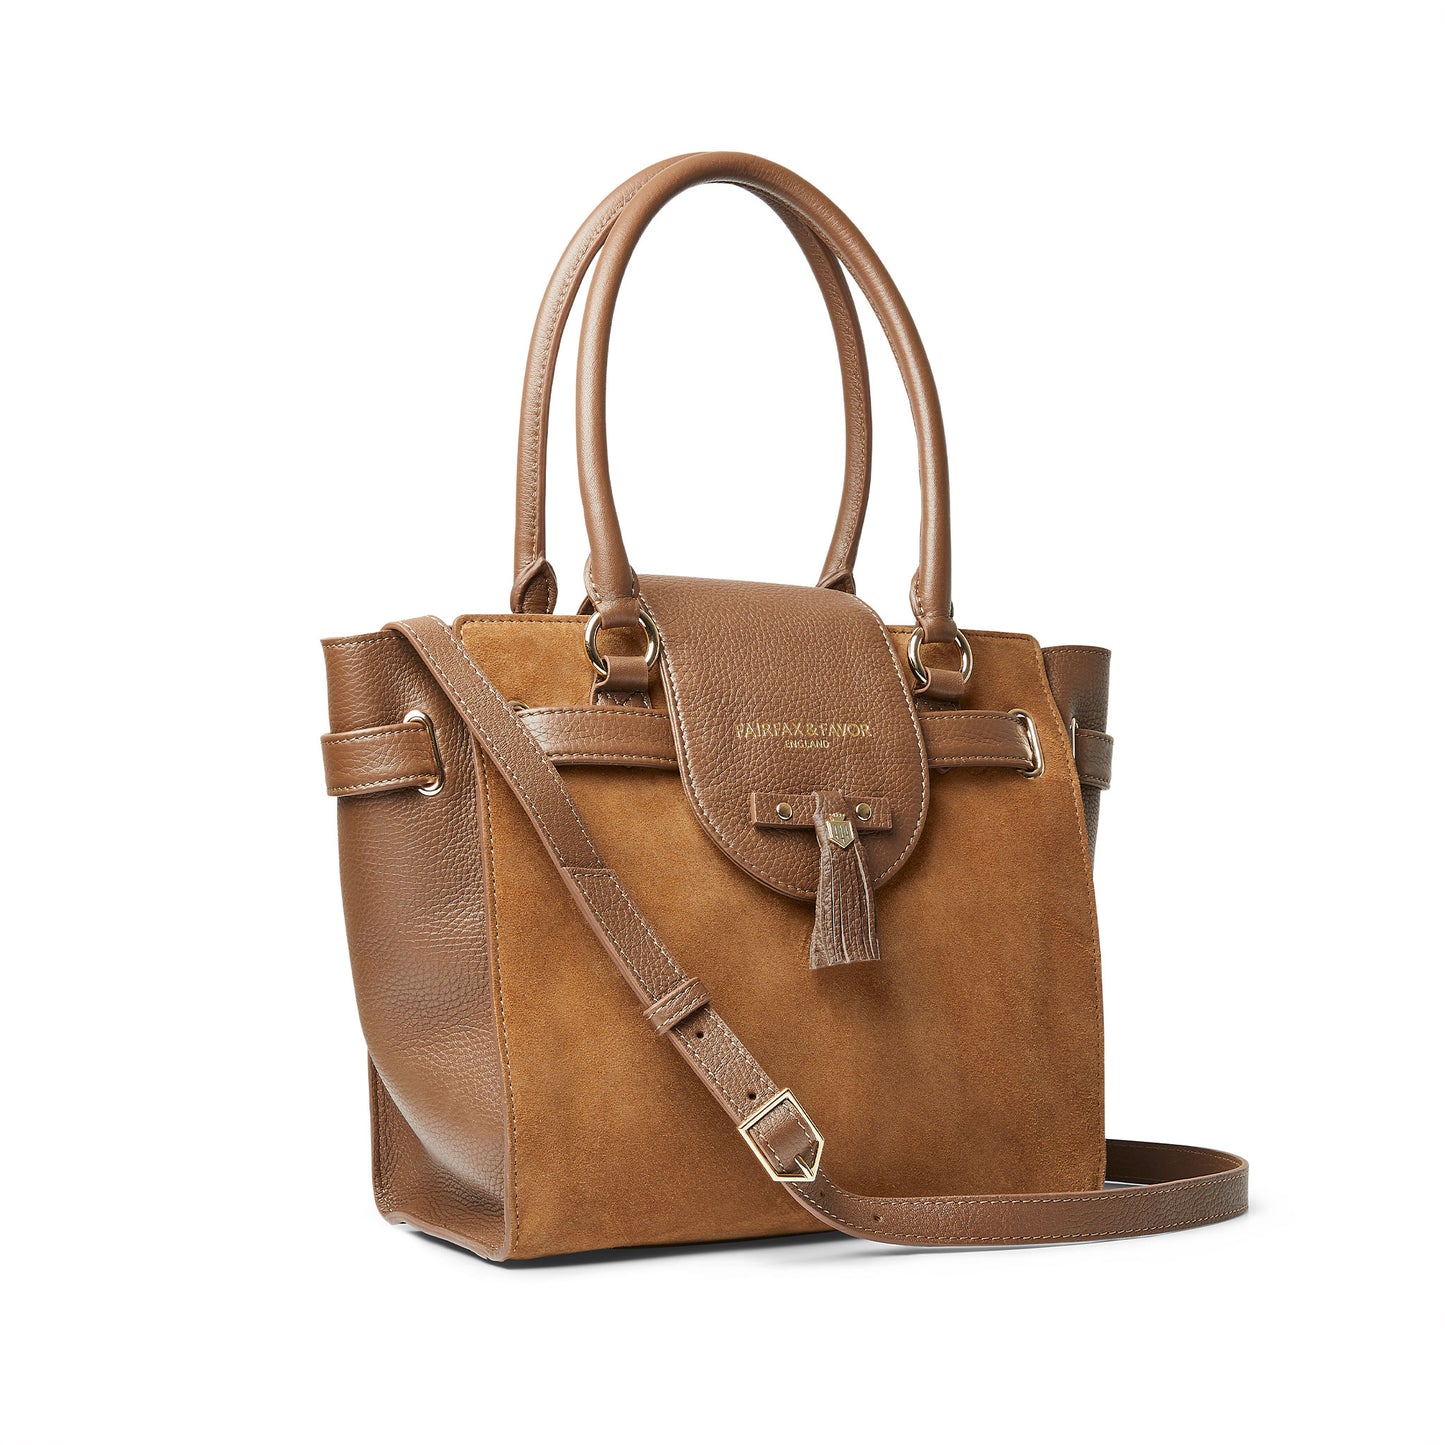 'Windsor Tote' Tan Suede & Leather